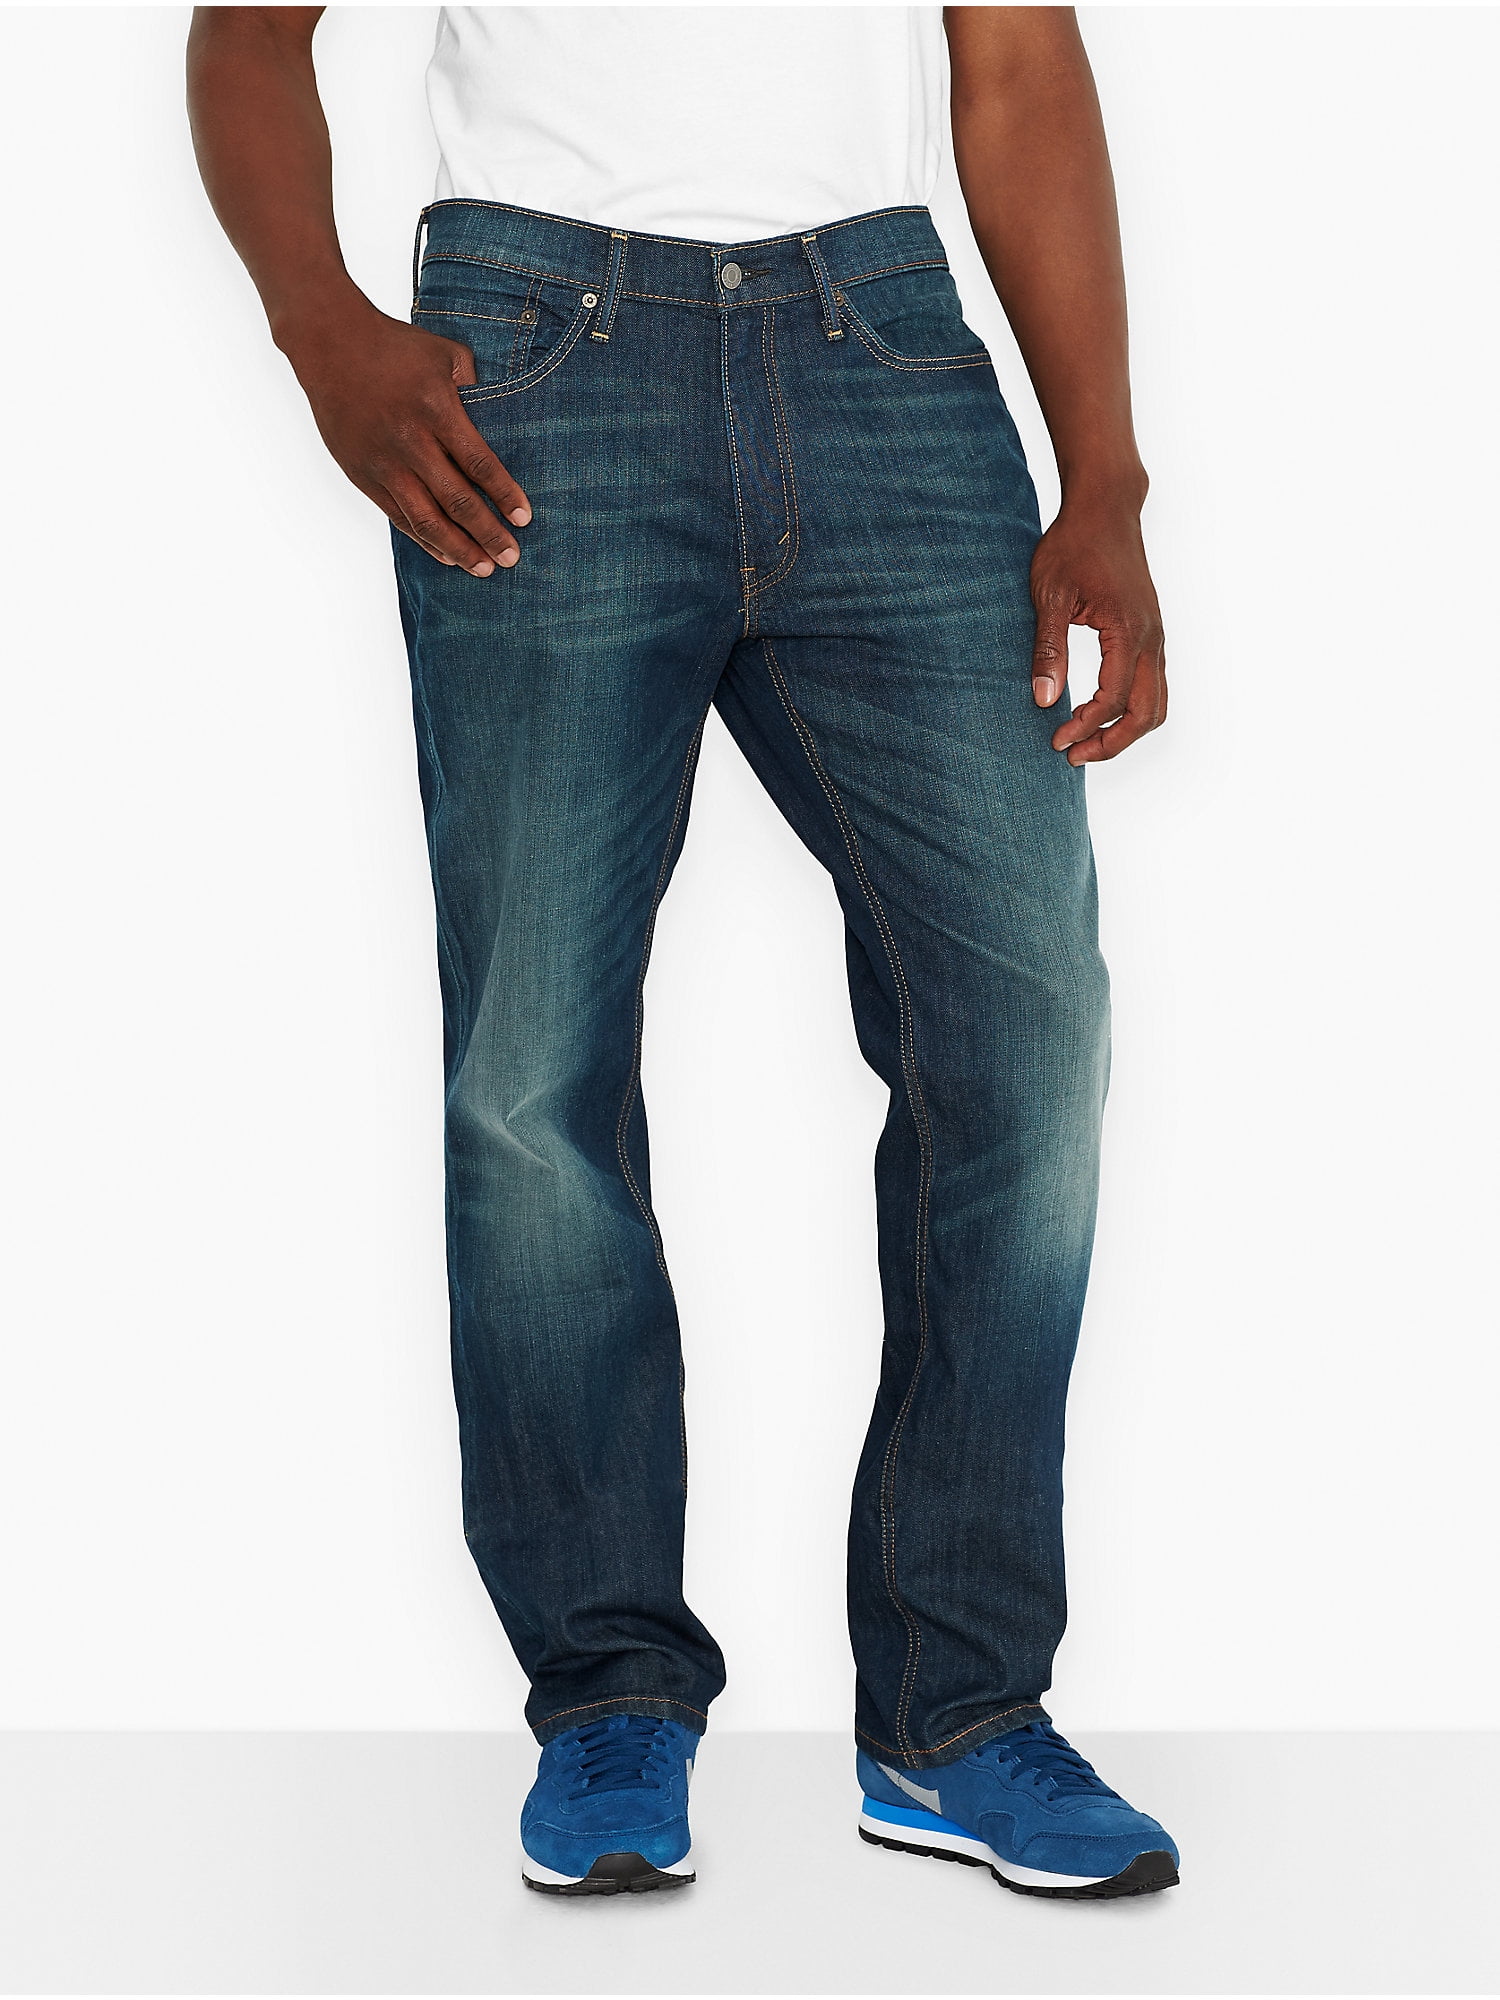 levi's men's big and tall 541 athletic fit jeans